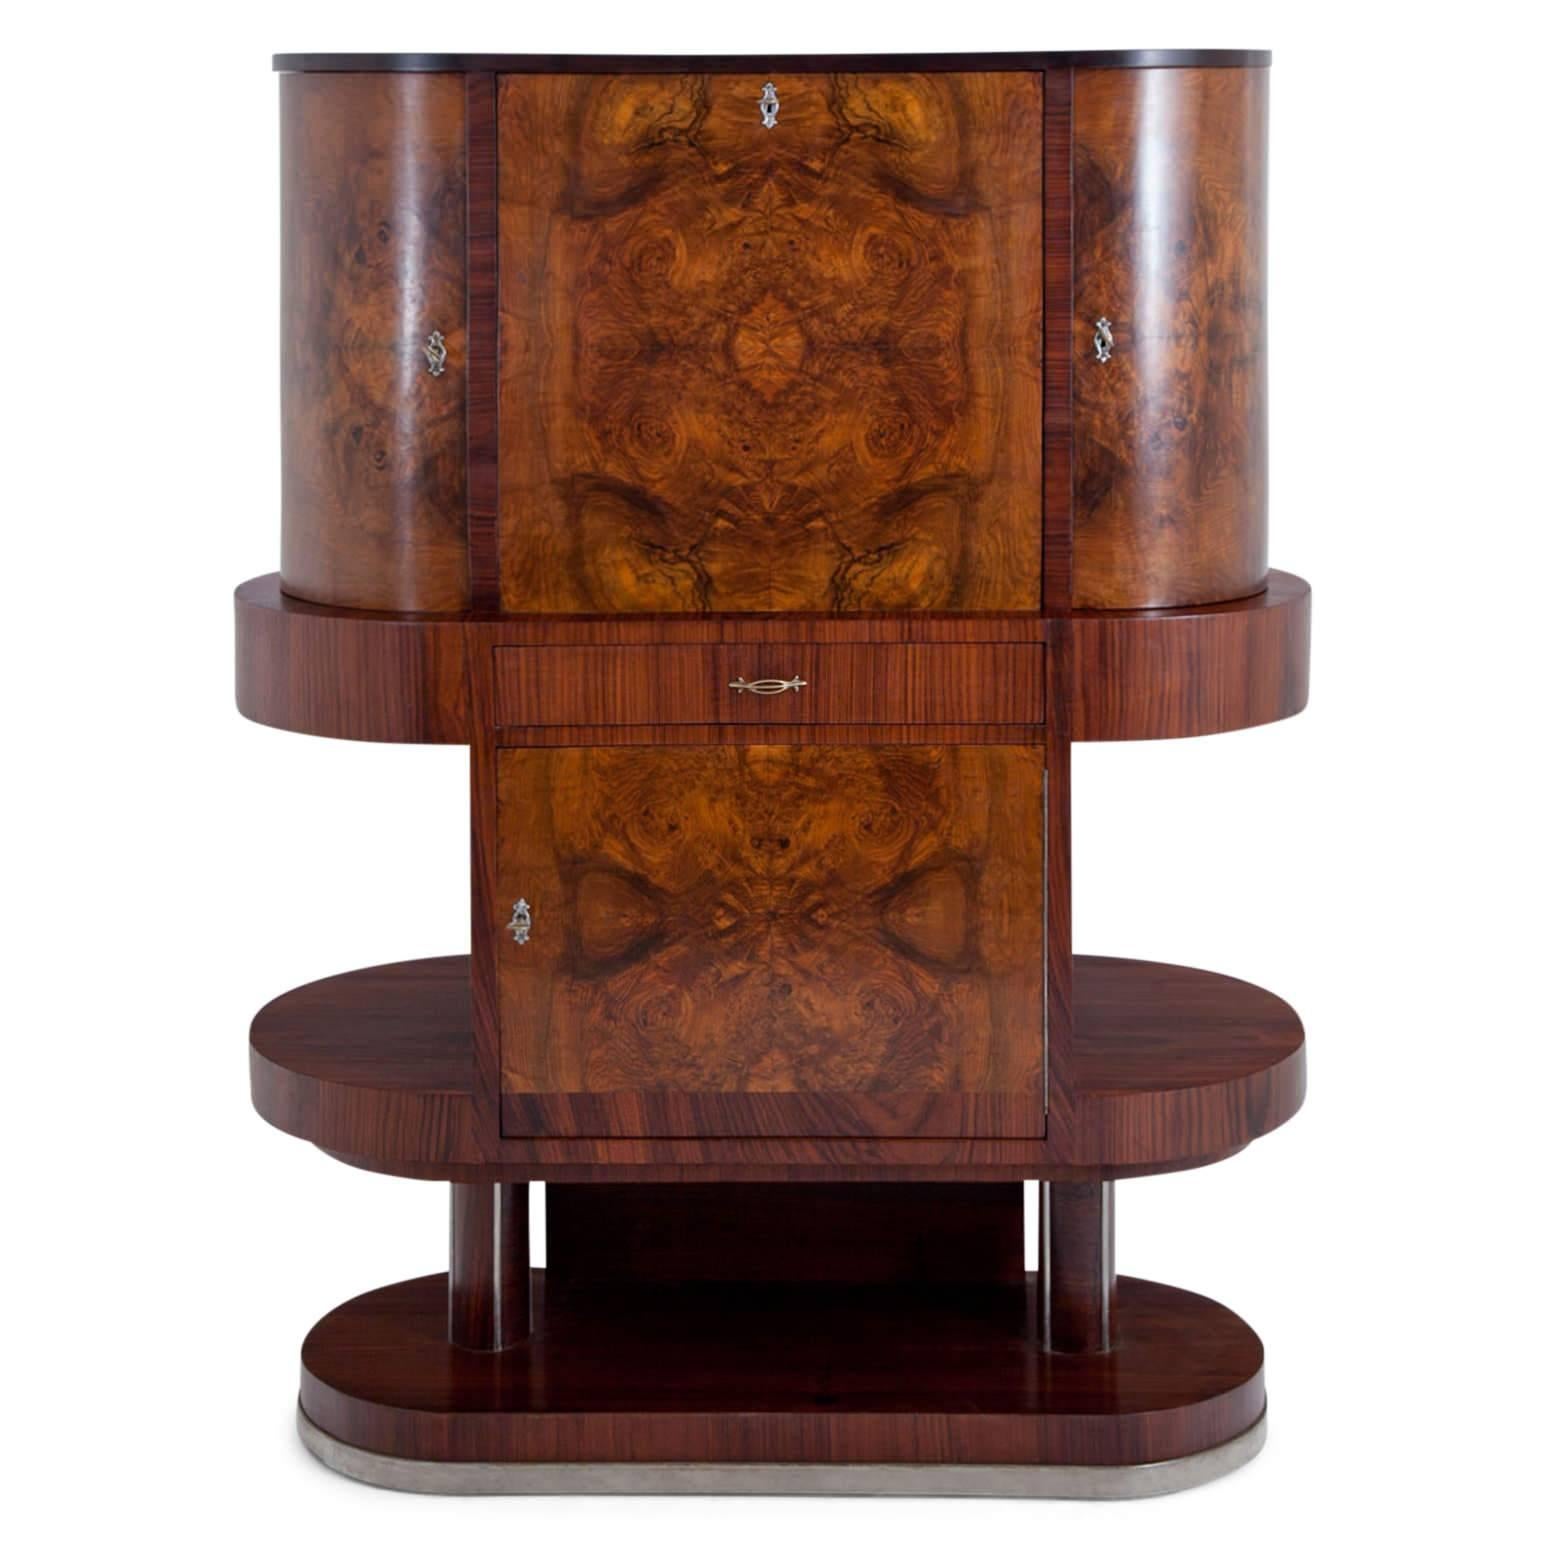 Tall Art Deco Bar Cabinet on an oval stand, with a middle compartment with two shelves and a three-doored top part. The door of the central cabinet folds down and the doors to the sides are rounded. The interior offers space for bottles and glasses.